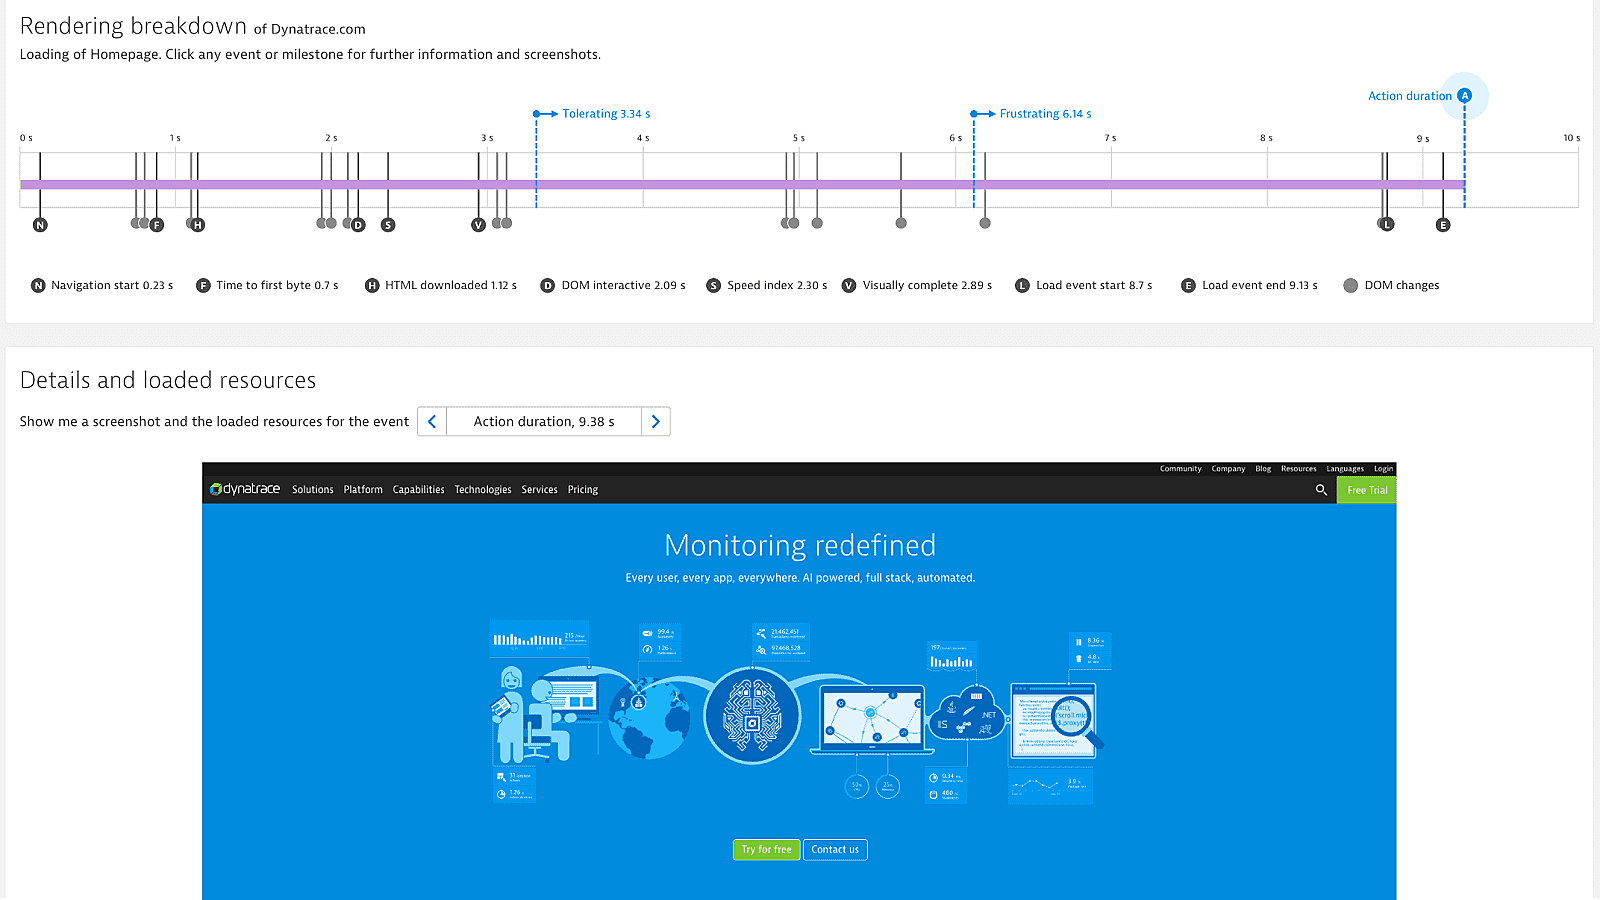 Dynatrace webpage action duration